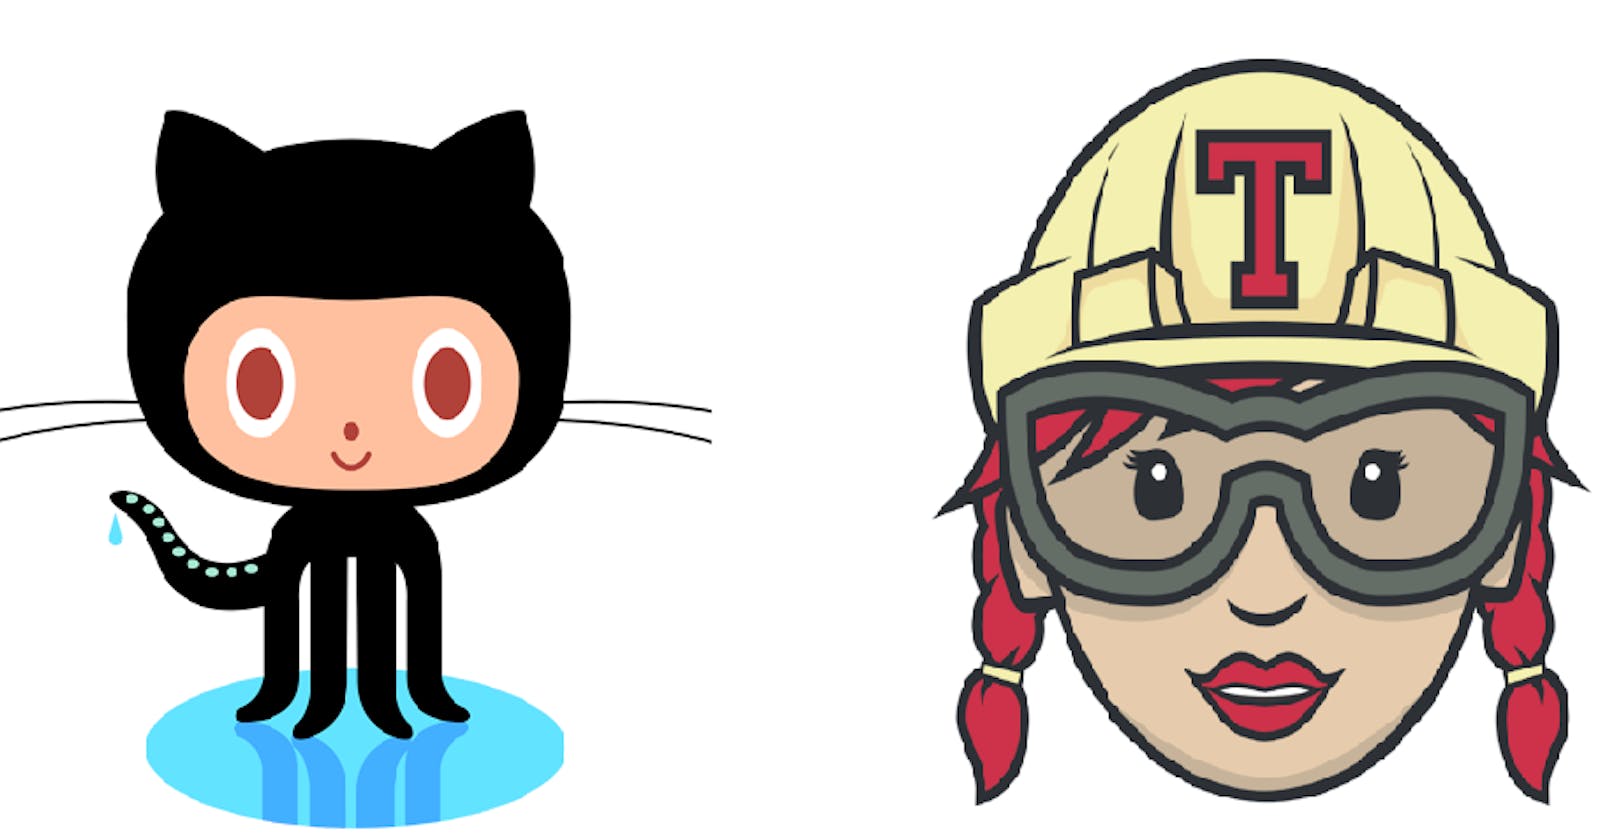 Deploy your project to GitHub page with TravisCI